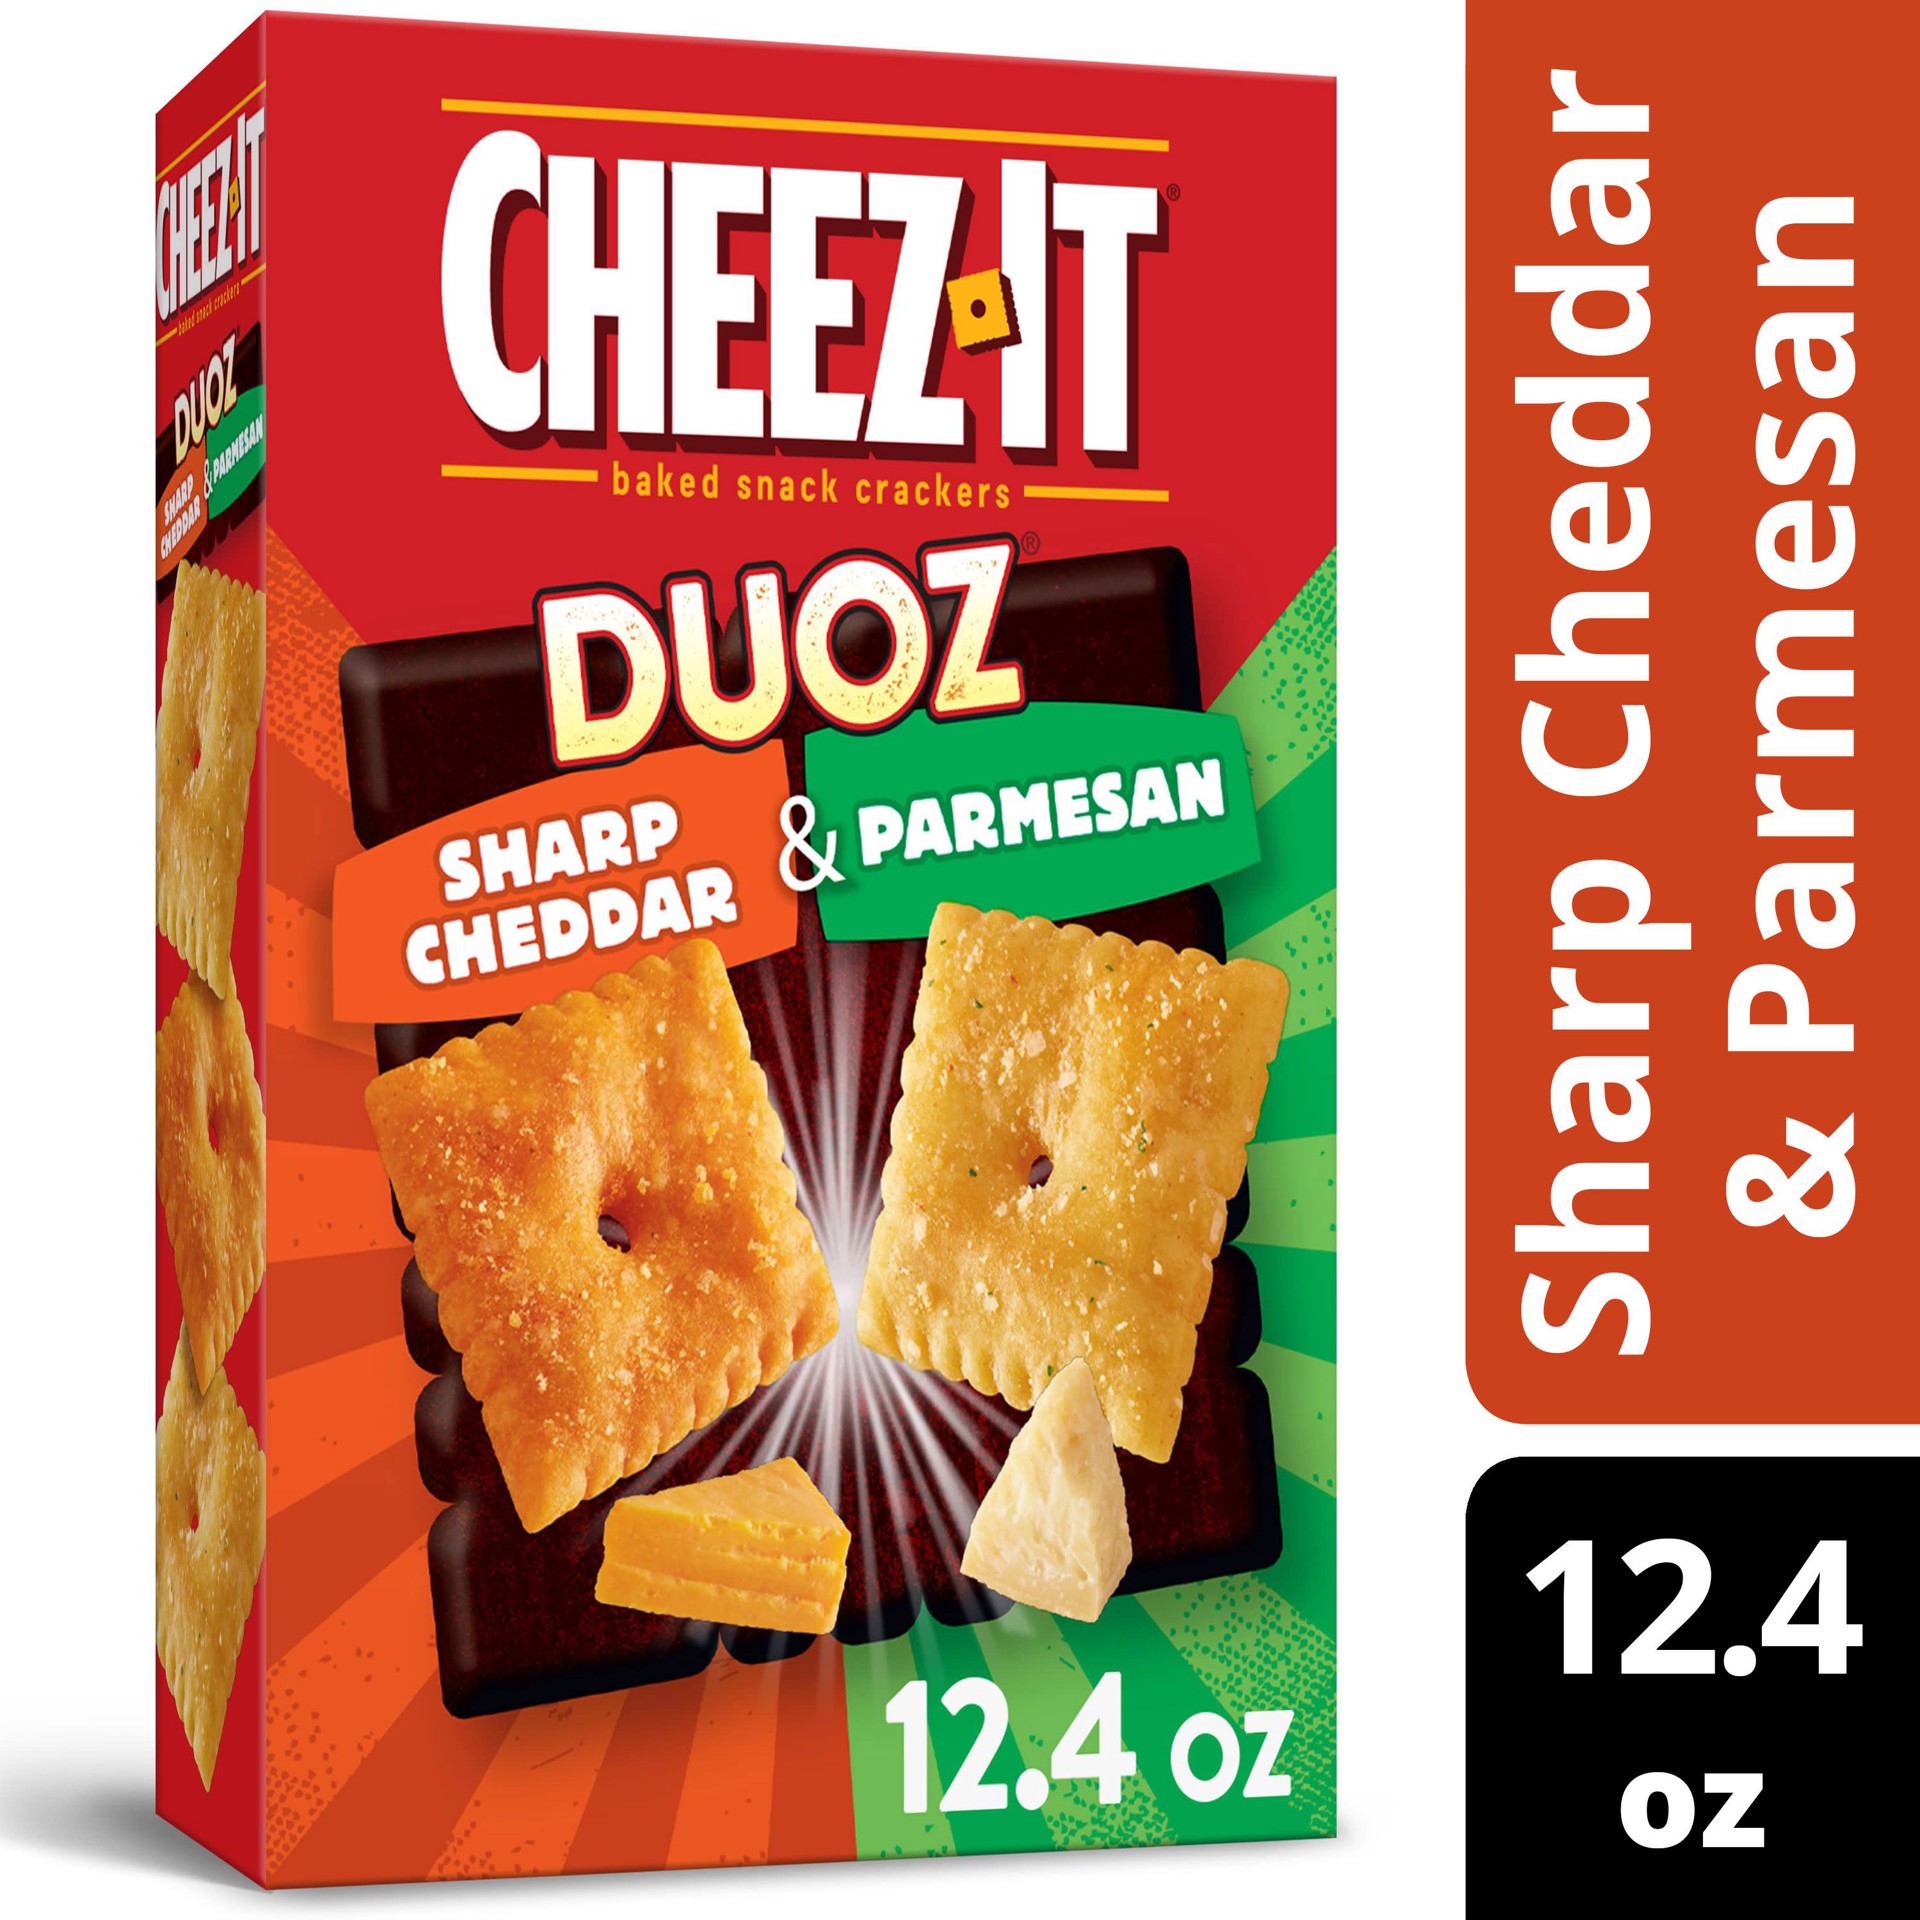 slide 1 of 5, Cheez-It Cheezit Duoz Sharp Cheddar & Parmesan Baked Snack Crackers, 